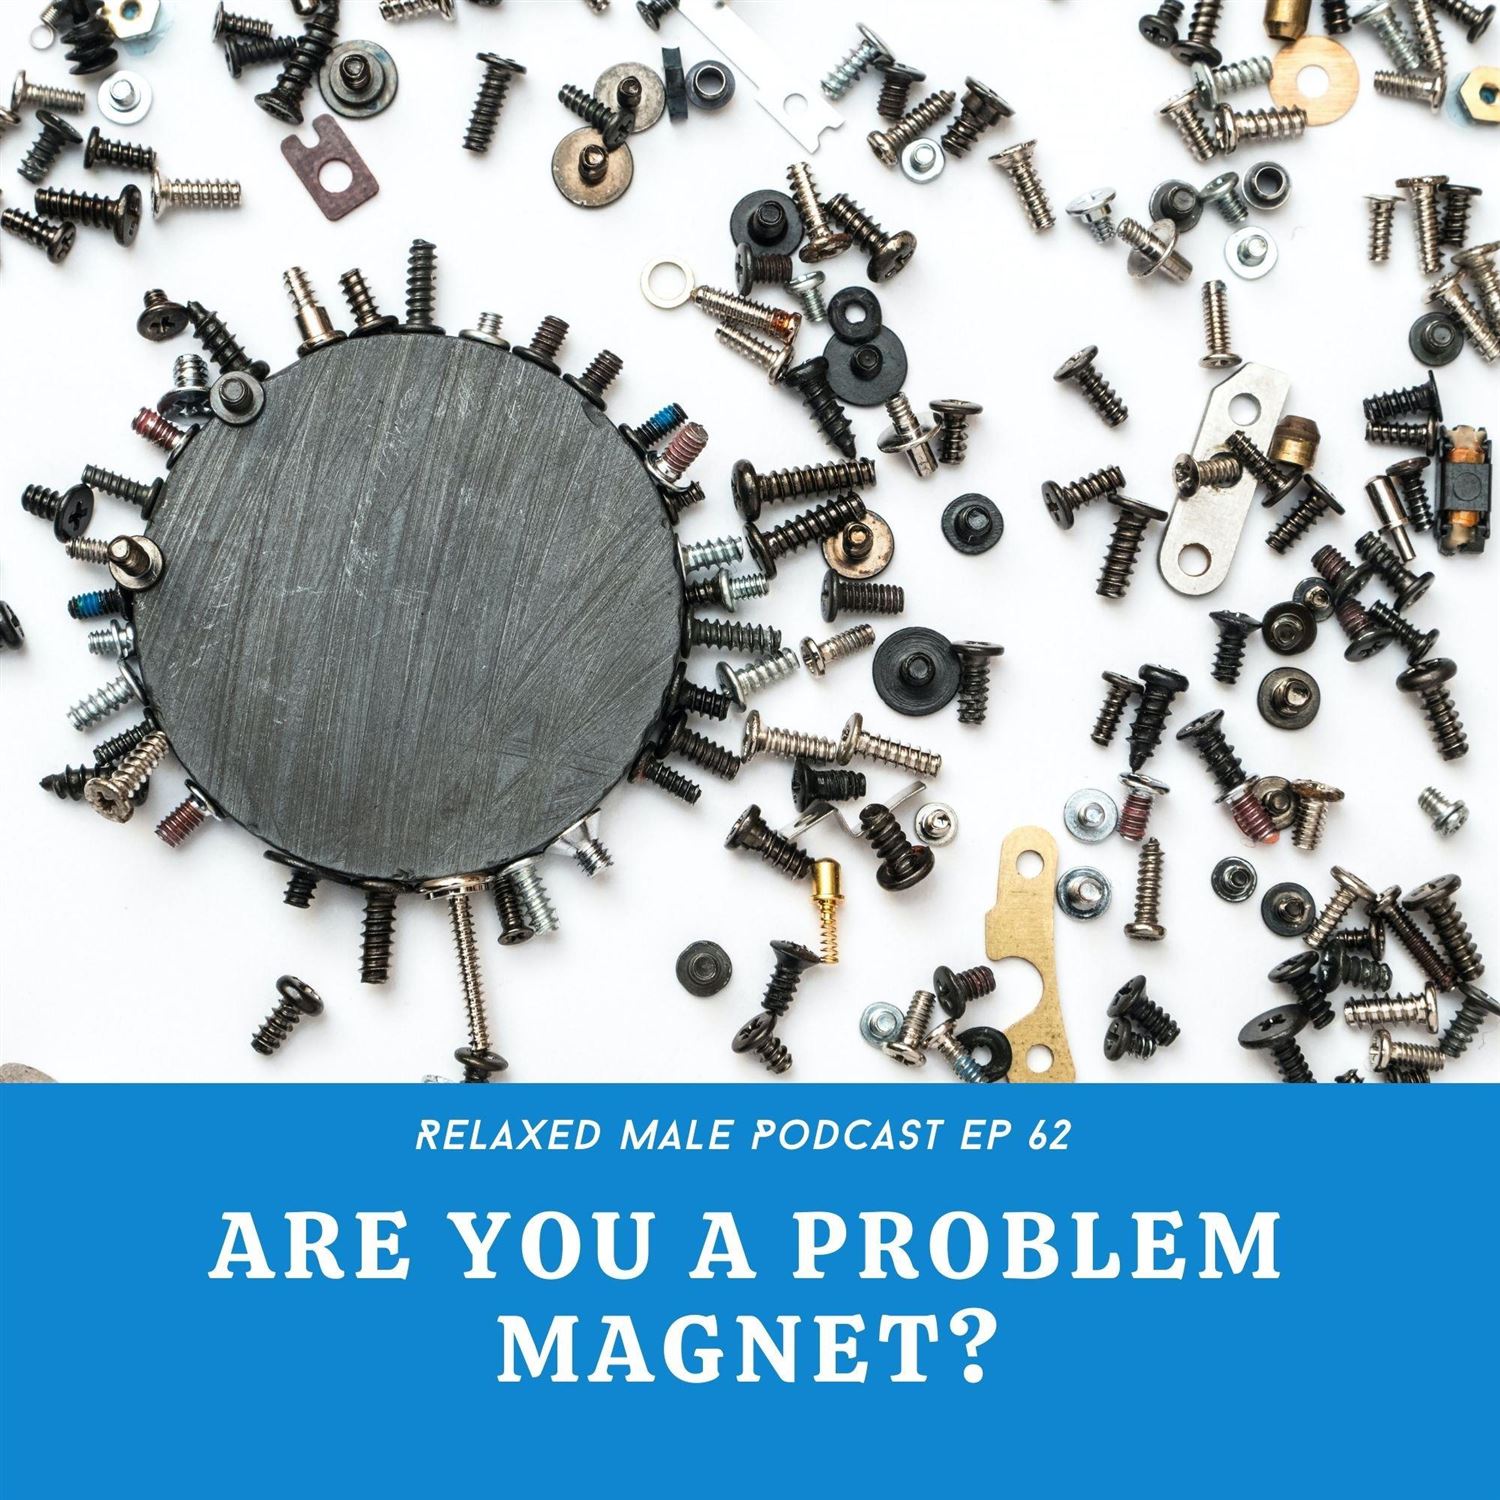 Are You a Problem Magnet?